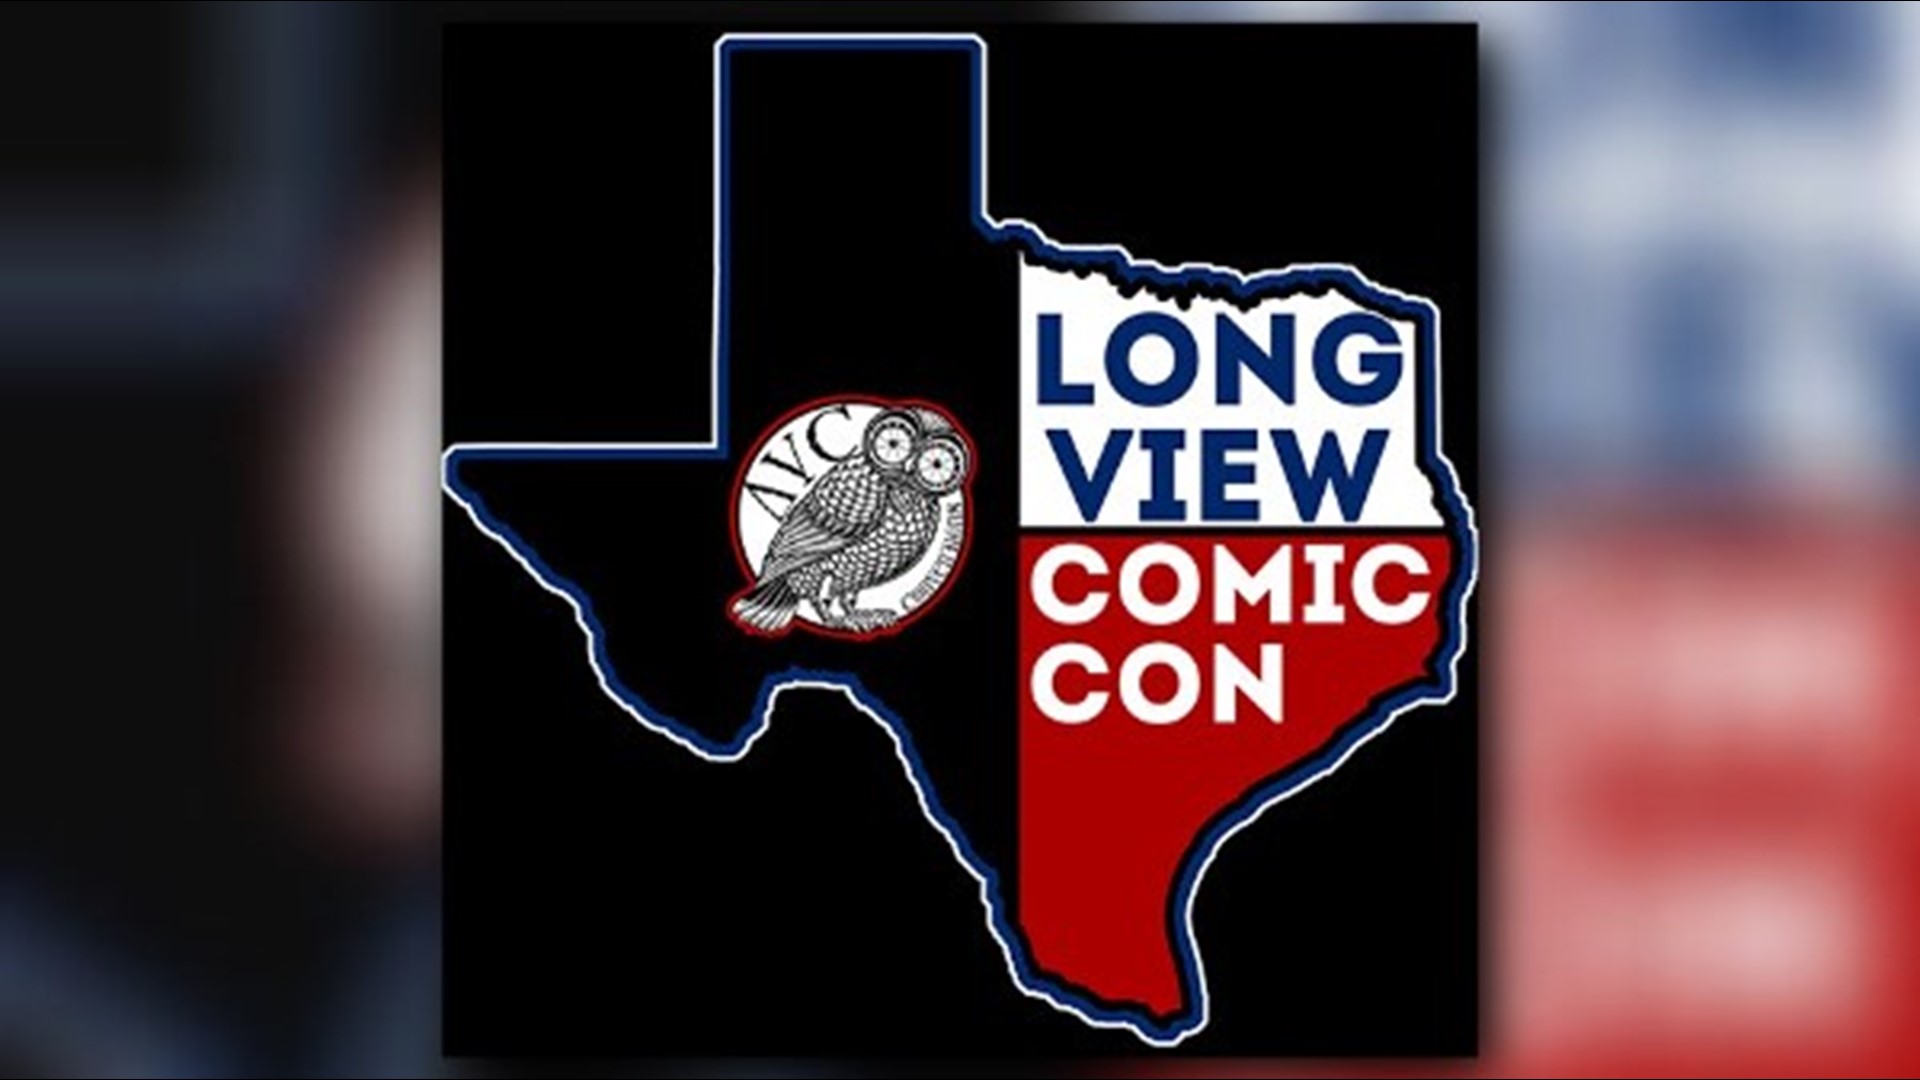 Comic Con is coming to Longview this weekend cbs19.tv